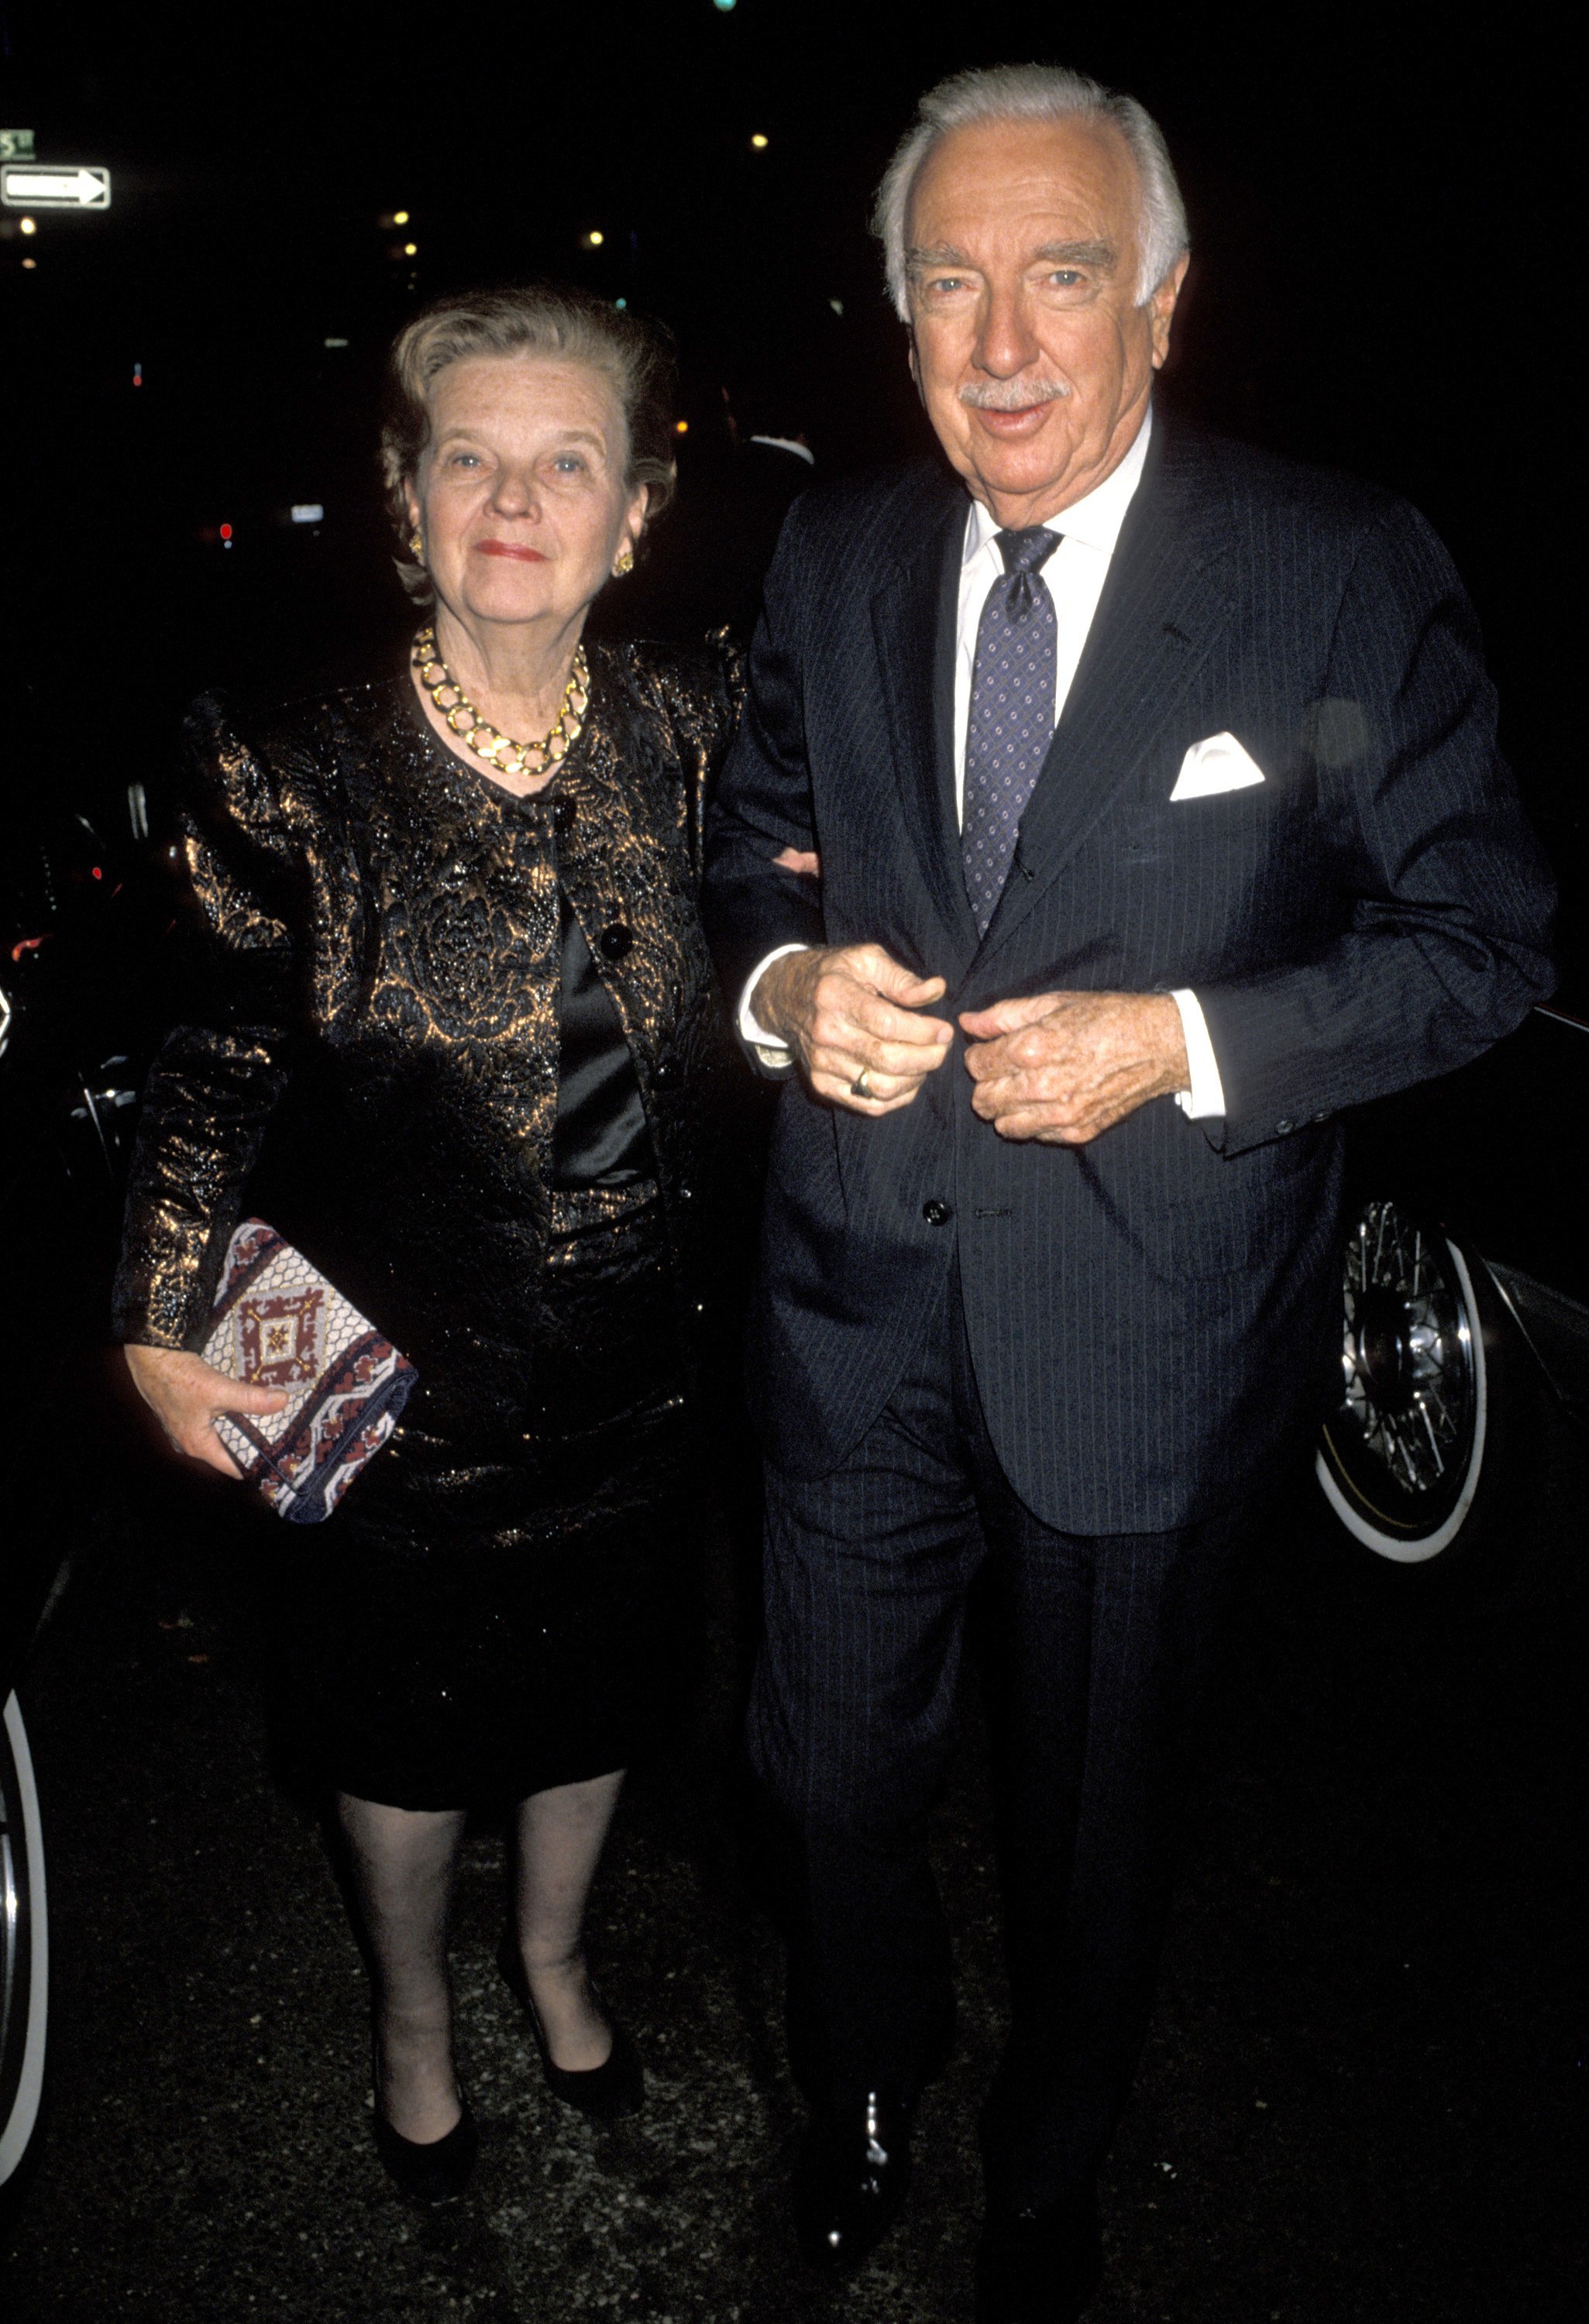 Walter Cronkite and wife Betsy in New York City on October 30, 1990 | Source: Getty Images